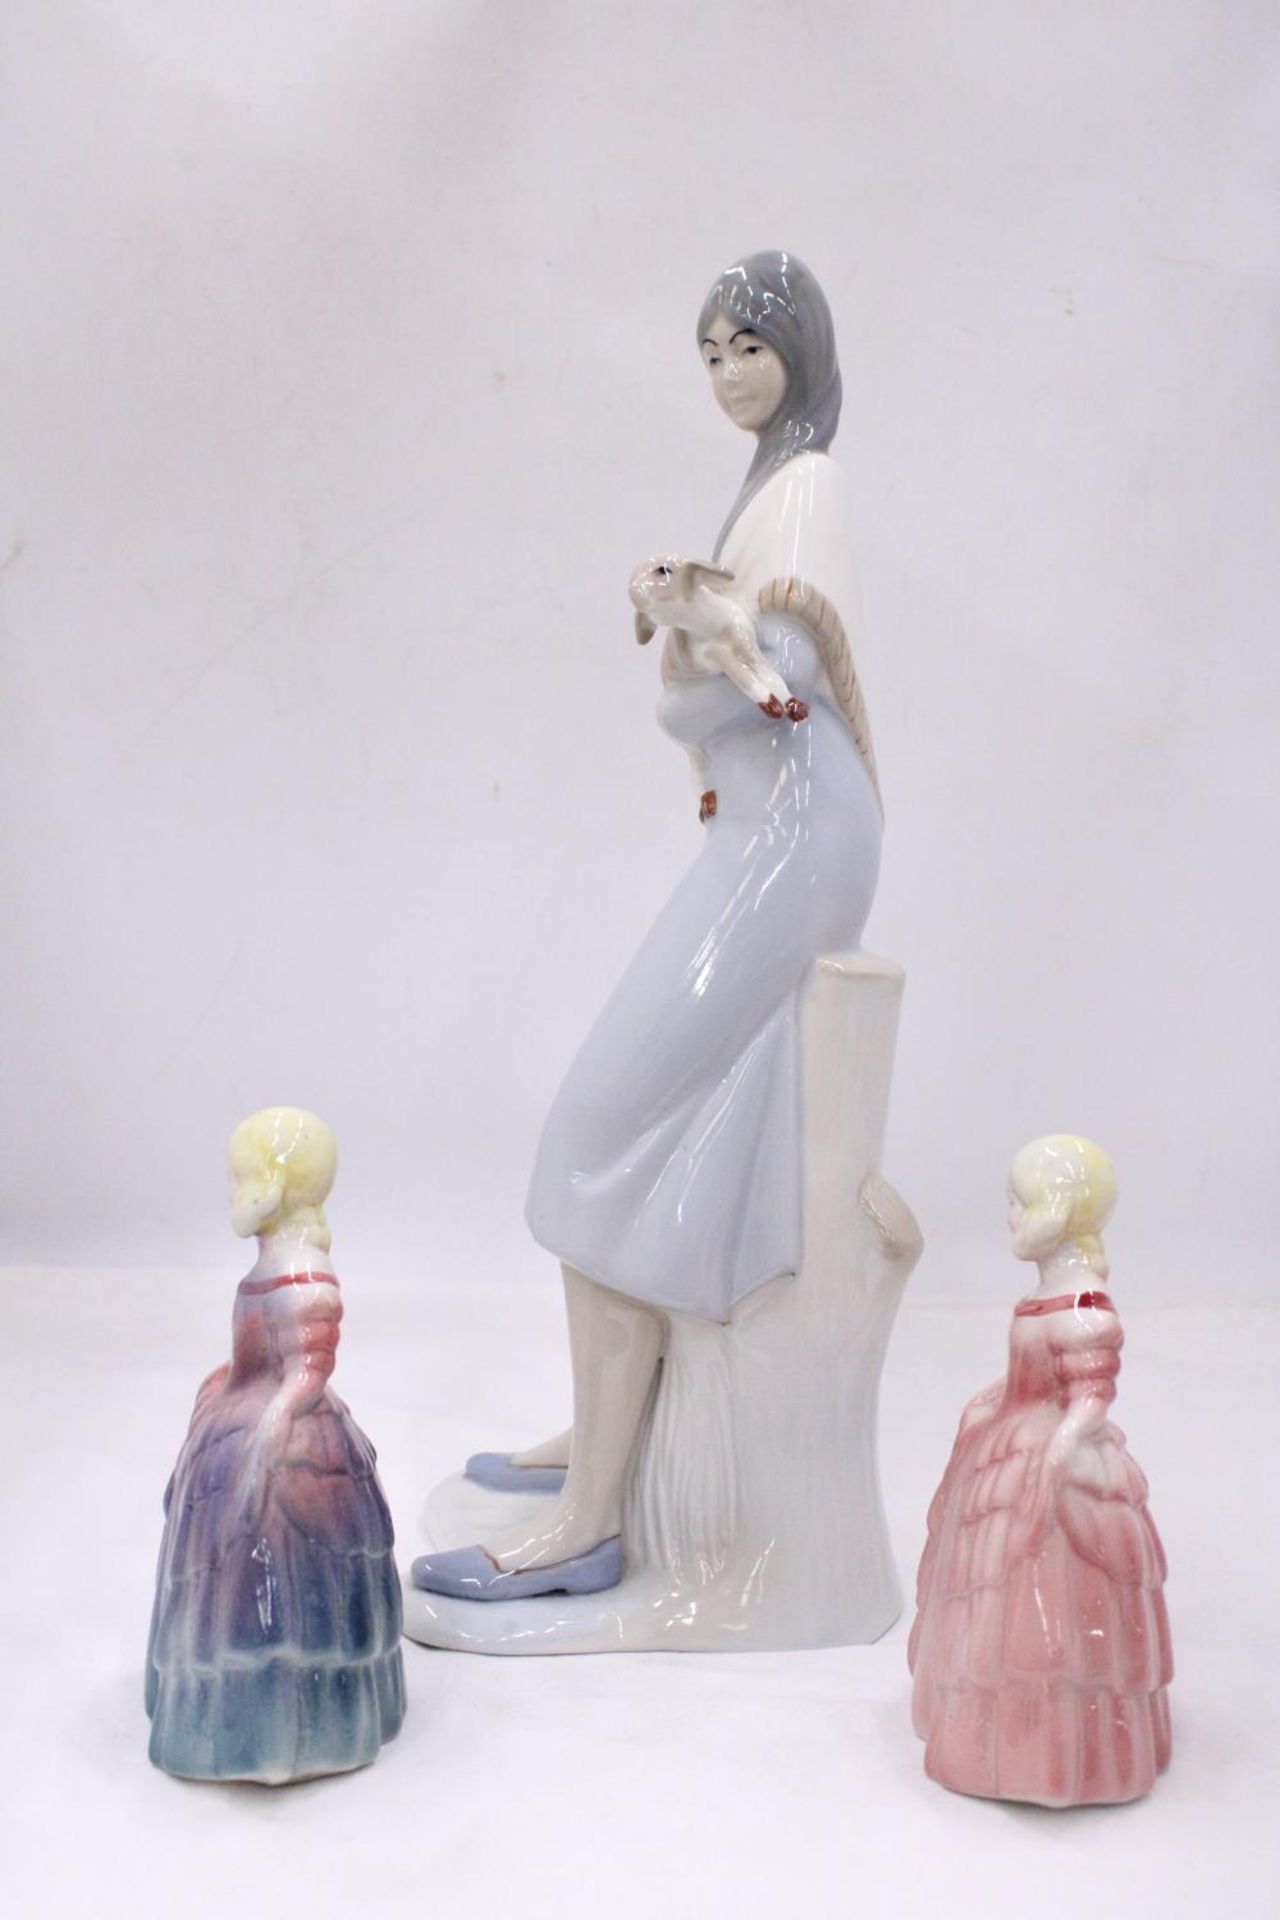 A LLADRO STYLE LADY FIGURE HOLDING A LAMB 38CM TALL, PLUS TWO ROYAL DOULTON STYLE FIGURES - Image 3 of 5